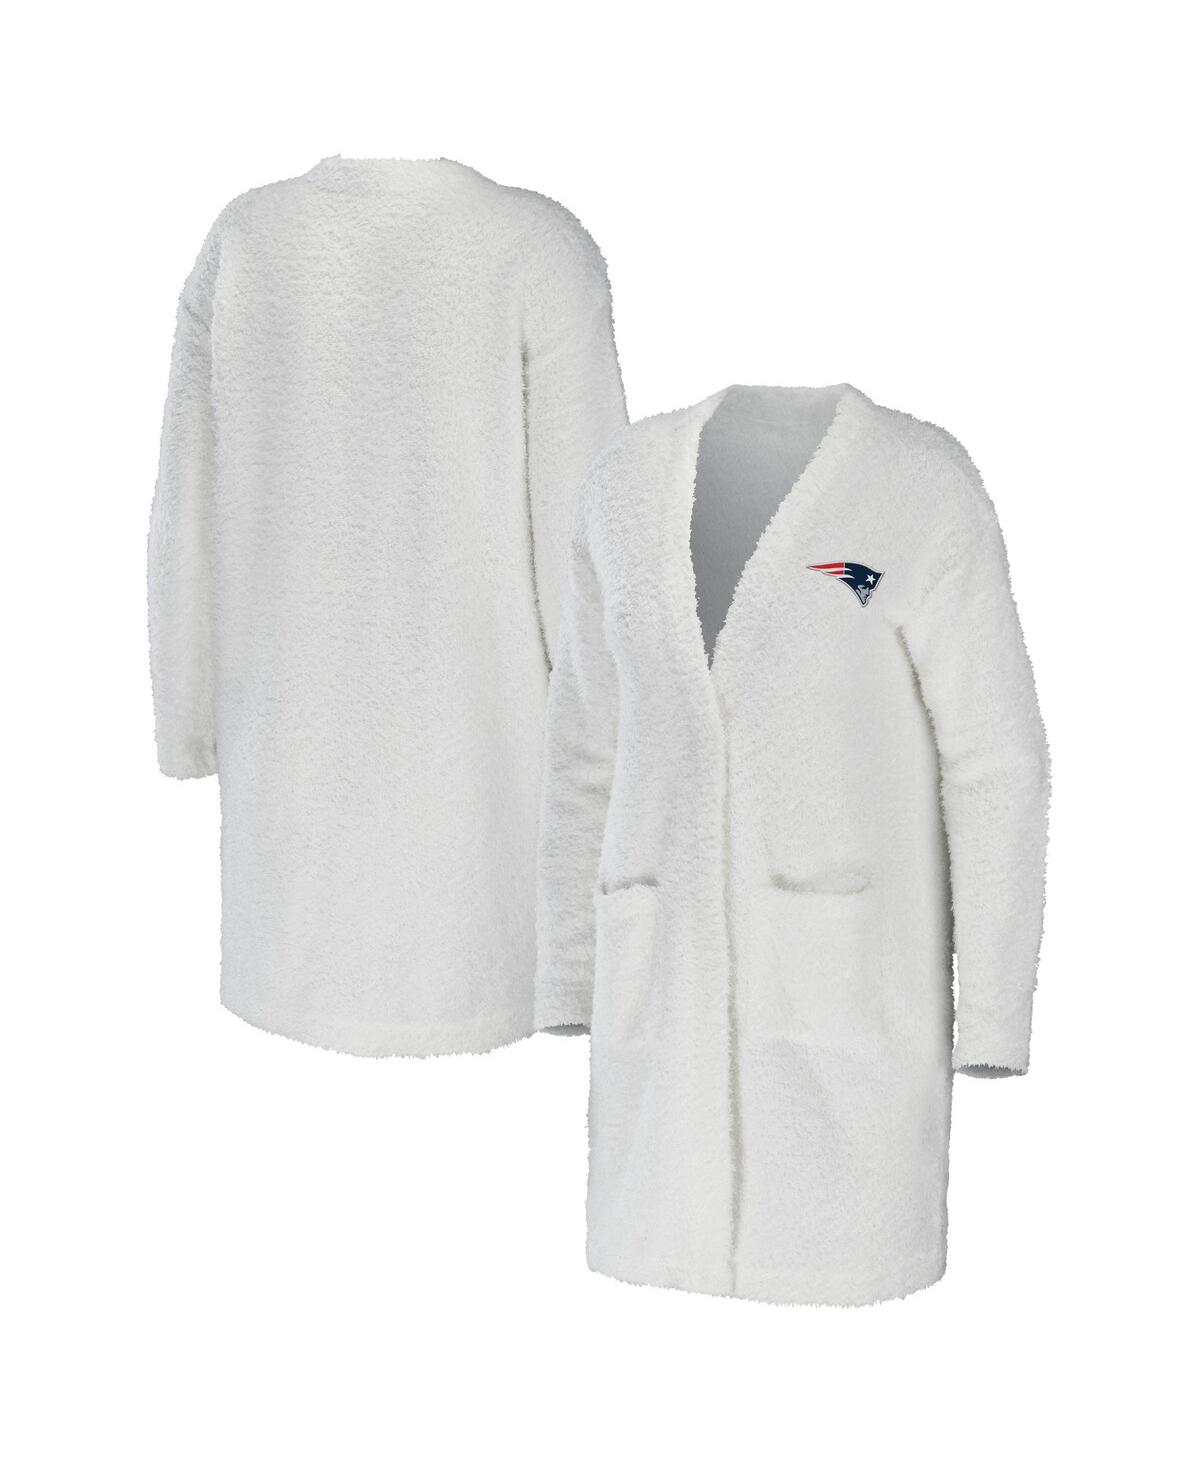 Shop Wear By Erin Andrews Women's  Cream New England Patriots Cozy Lounge Cardigan Sweater